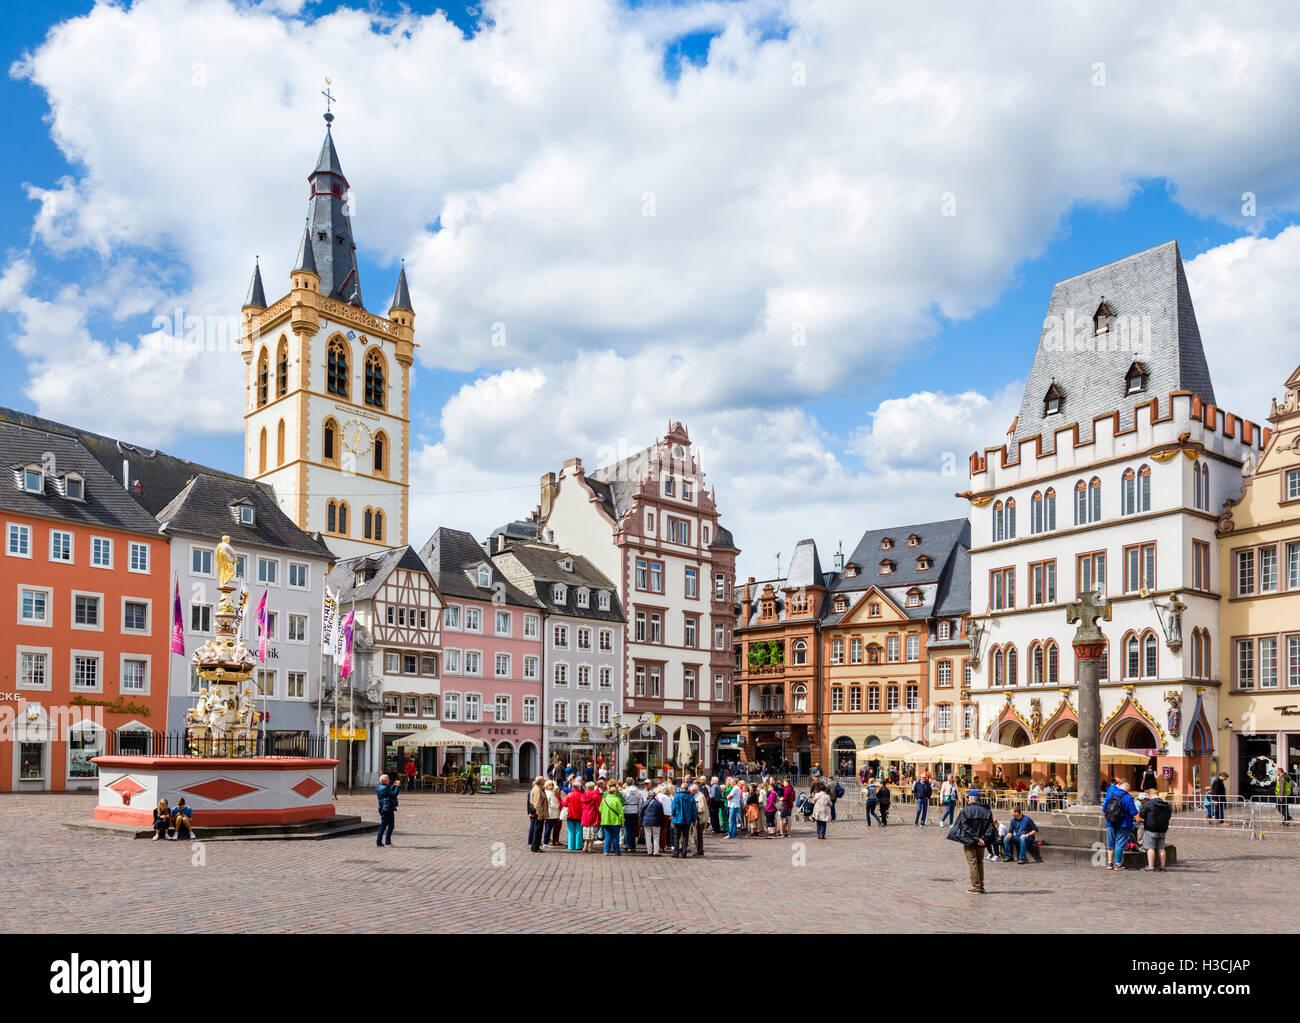 The Hauptmarkt in the old town, Trier, Rhineland-Palatinate, Germany Stock Photo